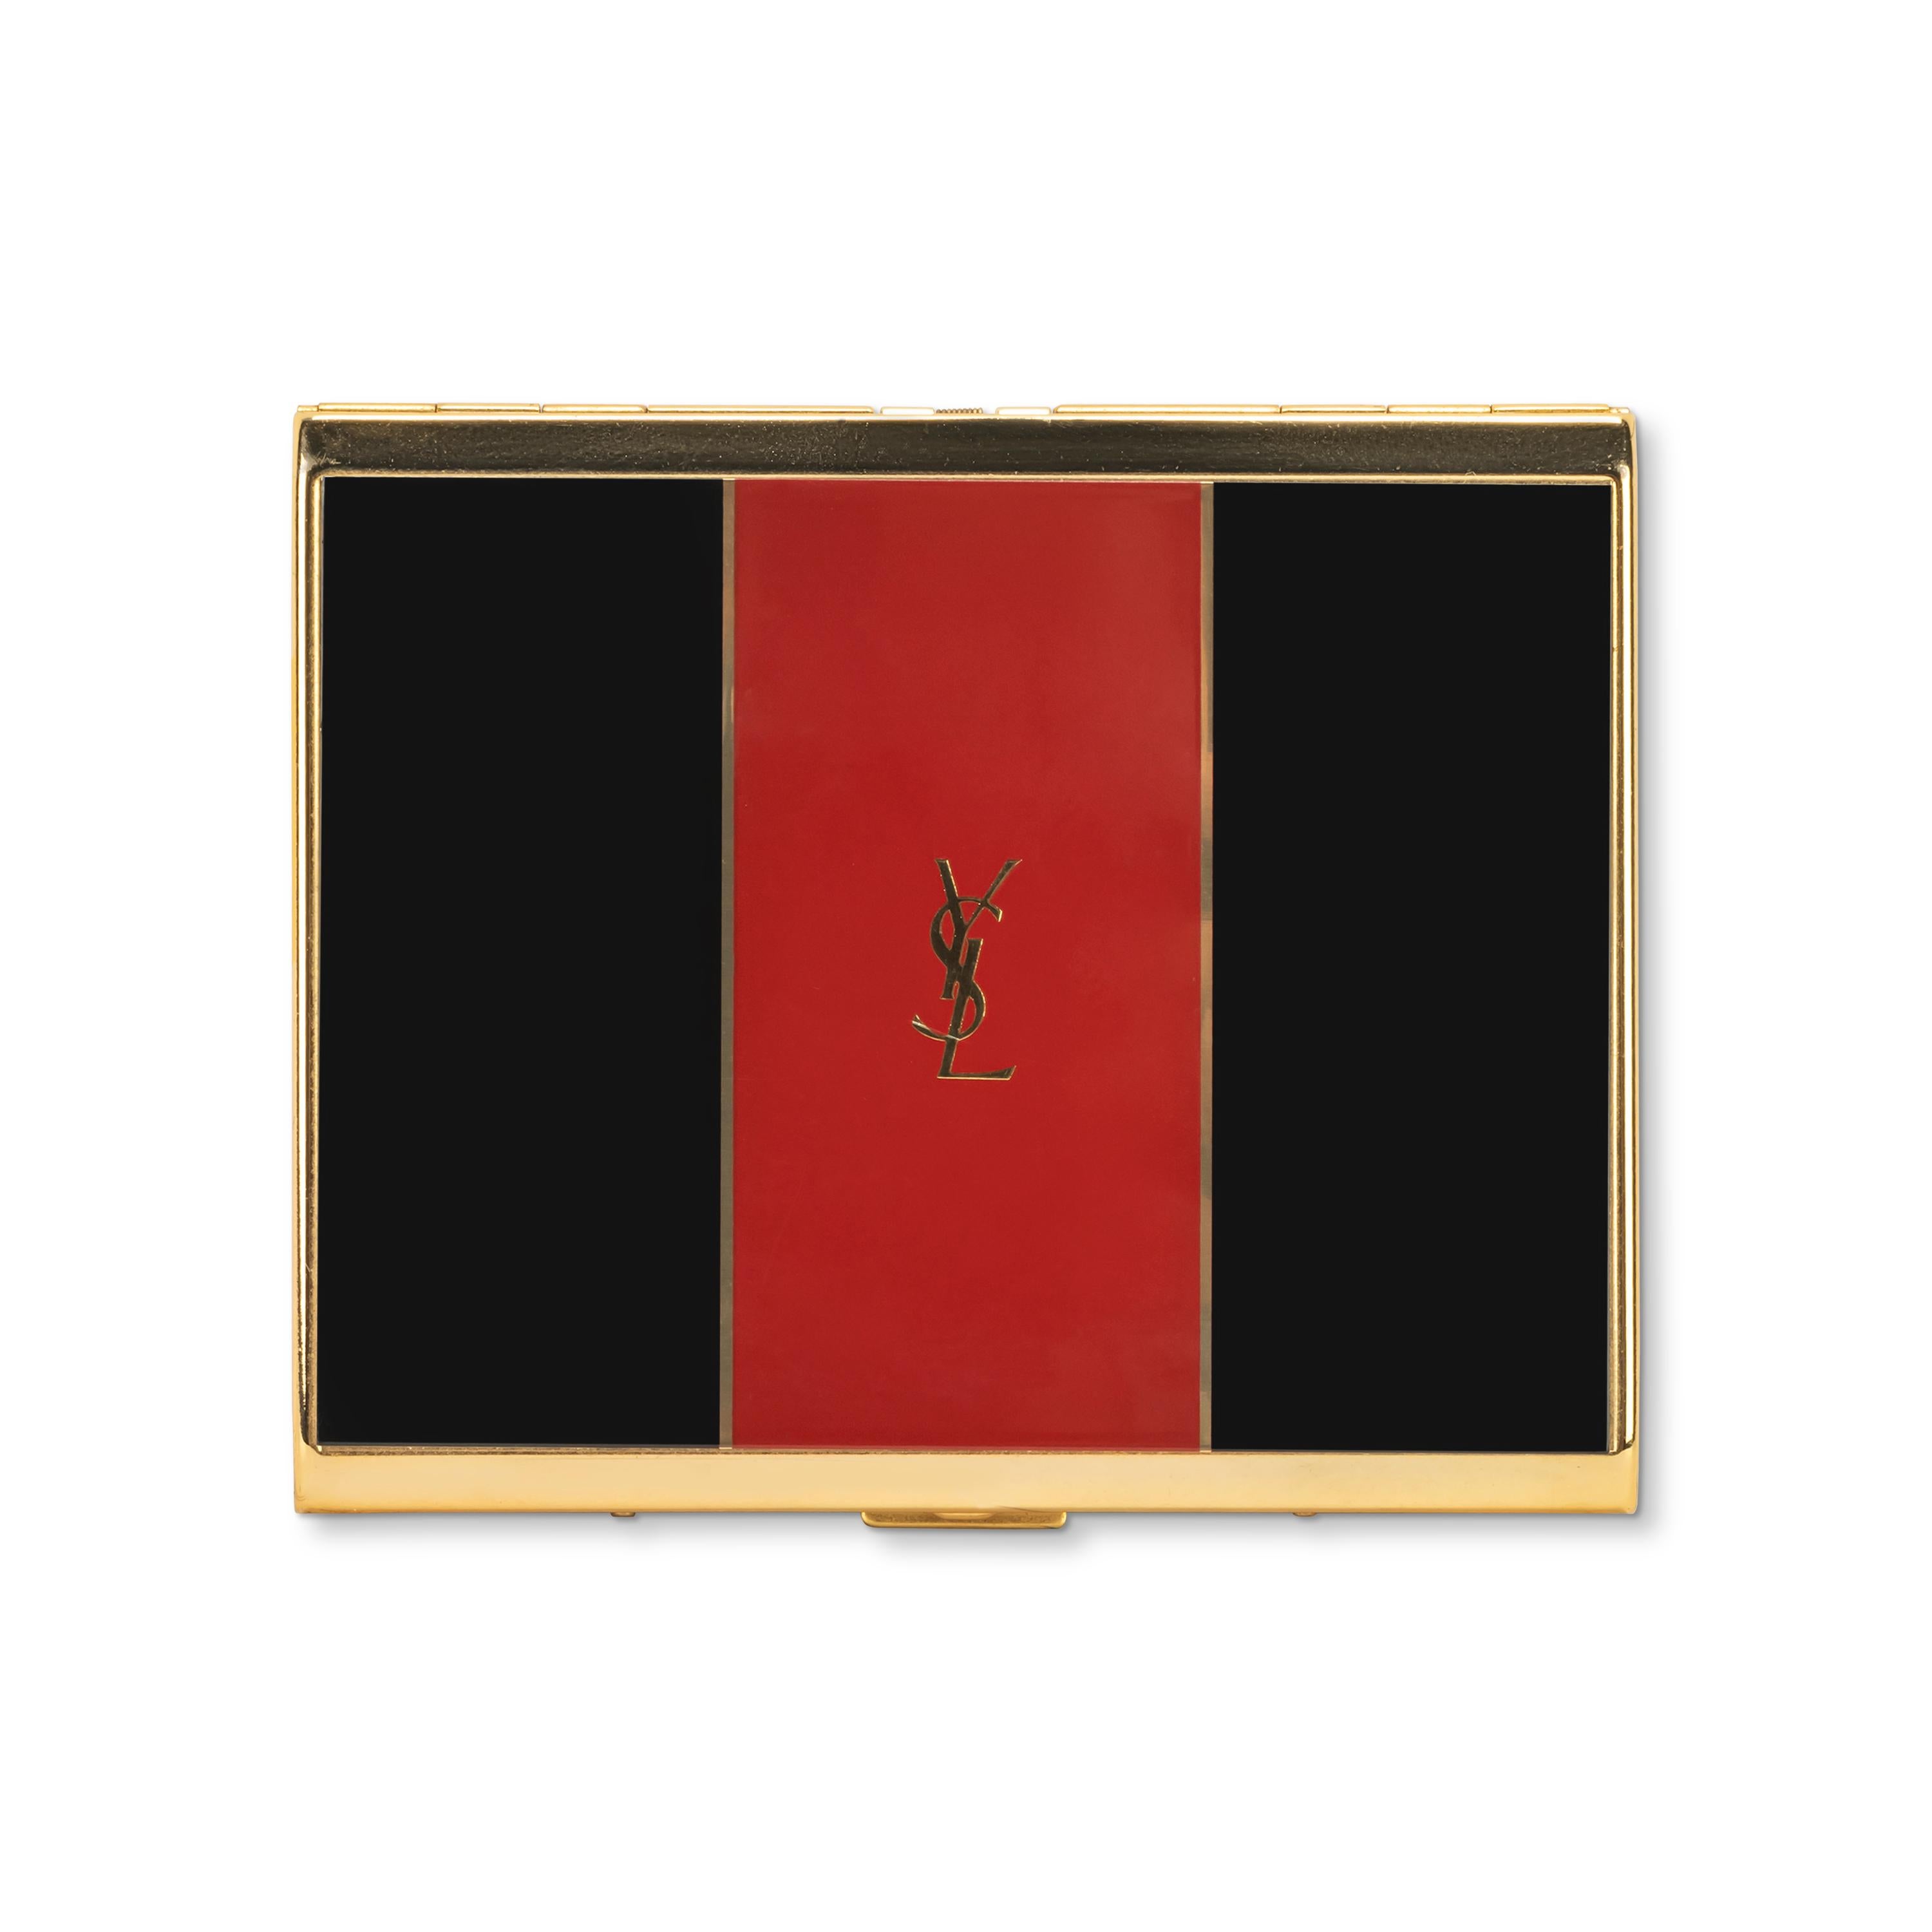 “YSL” Yves Saint Laurent retro cigarette case 
Logo Cigarette Case Gold Black Red
The case is in mint condition.
The clasp snaps as new. 
Retro. 
1970s
Gold plated. 
Signed YSL.
Very elegant and perfect for a unique classic gift. 